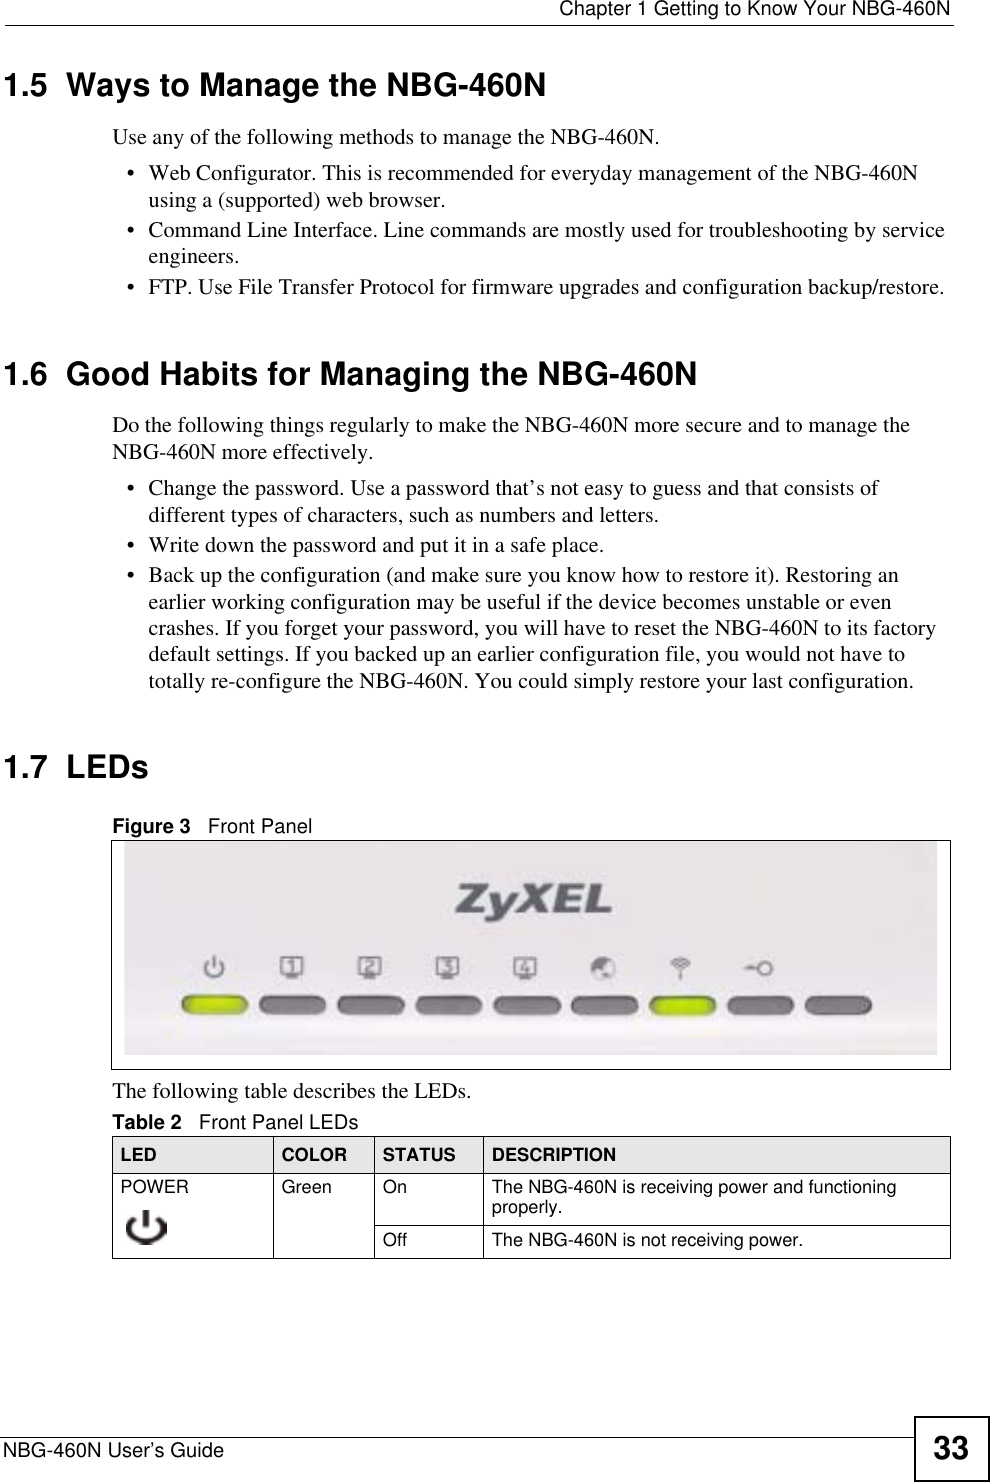  Chapter 1 Getting to Know Your NBG-460NNBG-460N User’s Guide 331.5  Ways to Manage the NBG-460NUse any of the following methods to manage the NBG-460N.• Web Configurator. This is recommended for everyday management of the NBG-460N using a (supported) web browser. • Command Line Interface. Line commands are mostly used for troubleshooting by service engineers.  • FTP. Use File Transfer Protocol for firmware upgrades and configuration backup/restore.1.6  Good Habits for Managing the NBG-460NDo the following things regularly to make the NBG-460N more secure and to manage the NBG-460N more effectively.• Change the password. Use a password that’s not easy to guess and that consists of different types of characters, such as numbers and letters.• Write down the password and put it in a safe place.• Back up the configuration (and make sure you know how to restore it). Restoring an earlier working configuration may be useful if the device becomes unstable or even crashes. If you forget your password, you will have to reset the NBG-460N to its factory default settings. If you backed up an earlier configuration file, you would not have to totally re-configure the NBG-460N. You could simply restore your last configuration.1.7  LEDsFigure 3   Front PanelThe following table describes the LEDs.Table 2   Front Panel LEDsLED COLOR STATUS DESCRIPTIONPOWER Green On The NBG-460N is receiving power and functioning properly. Off The NBG-460N is not receiving power.